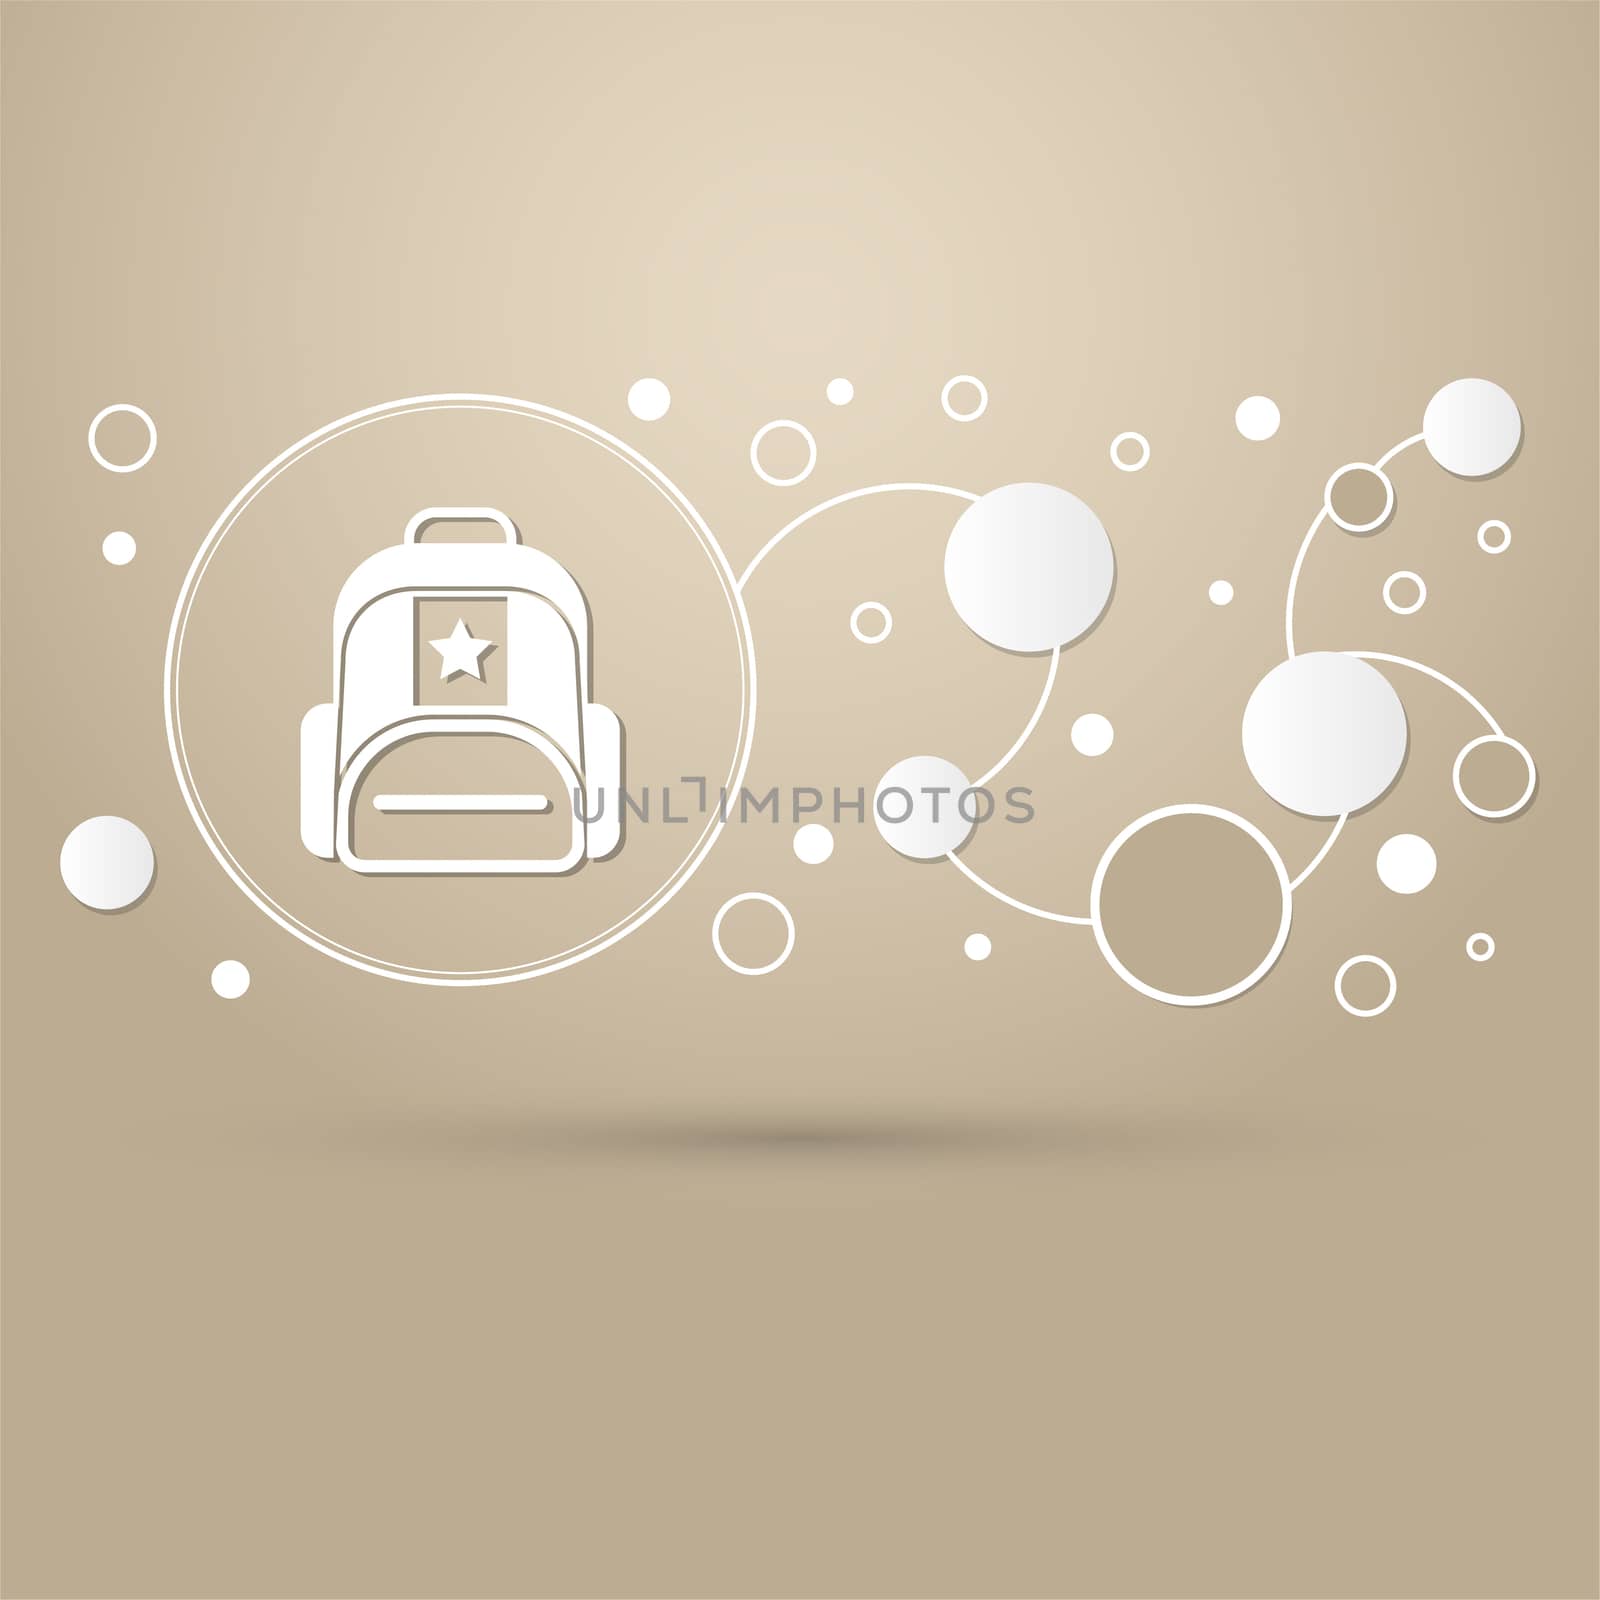 Briefcase, case, bag icon on a brown background with elegant style and modern design infographic.  by Adamchuk